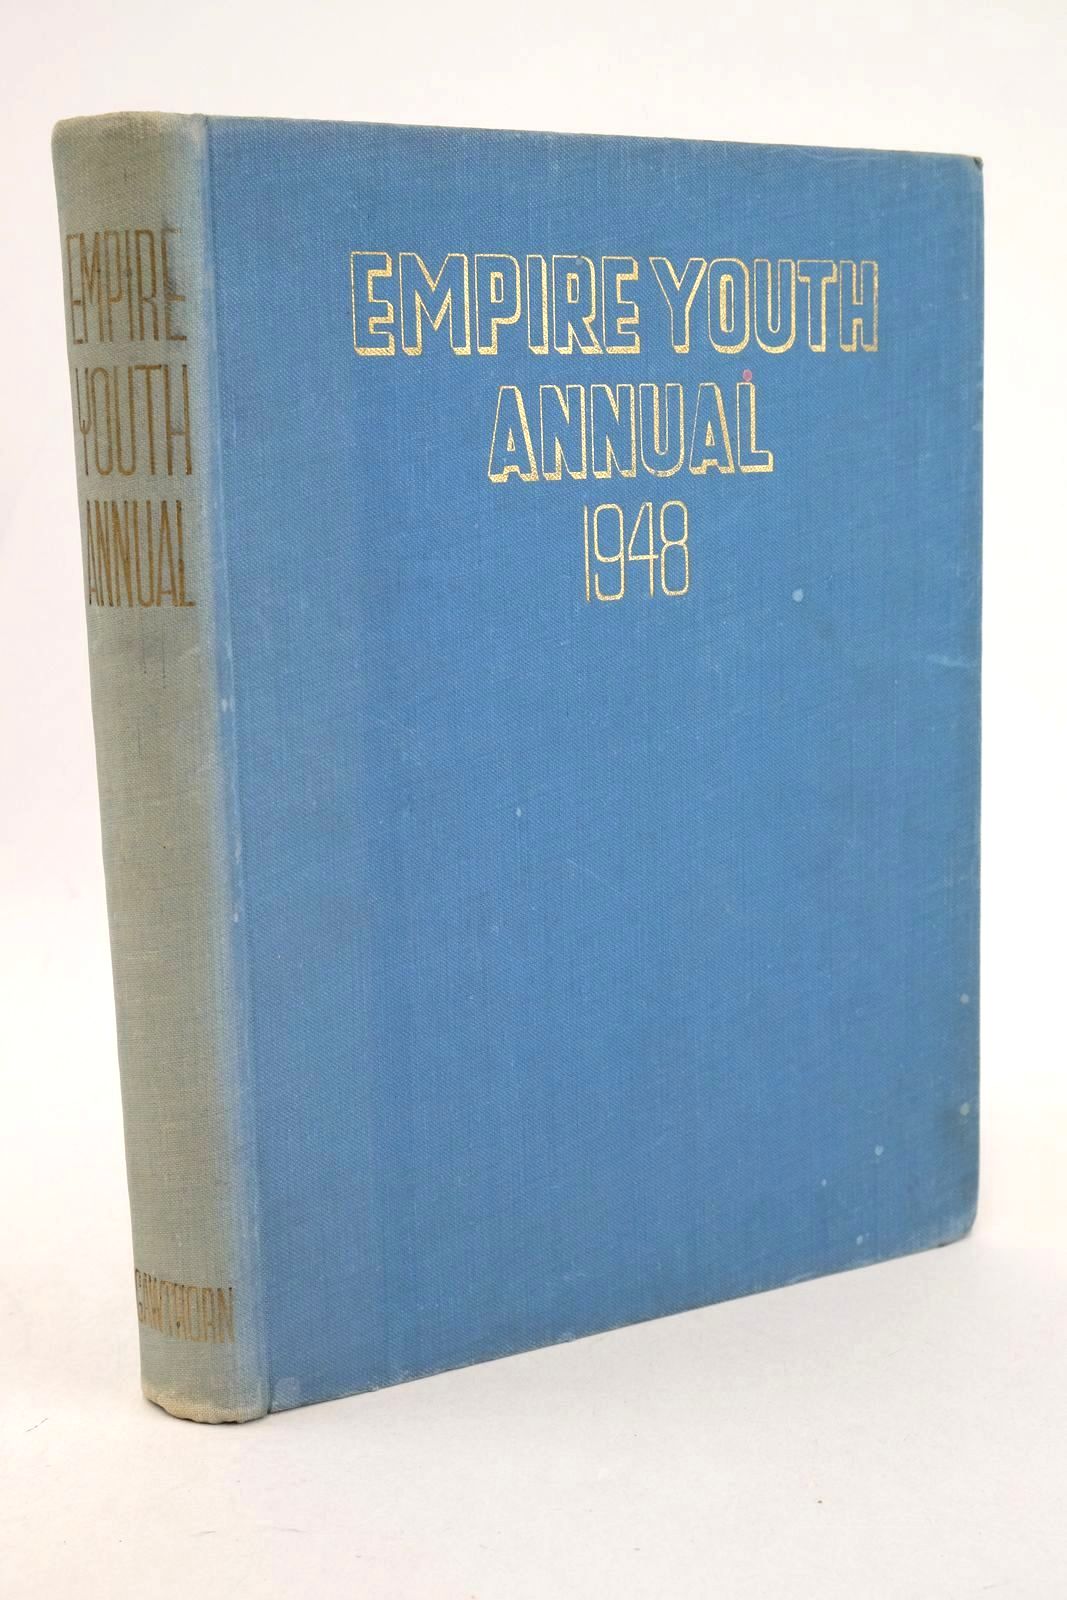 Photo of EMPIRE YOUTH ANNUAL 1948 published by P.R. Gawthorn Ltd. (STOCK CODE: 1327266)  for sale by Stella & Rose's Books